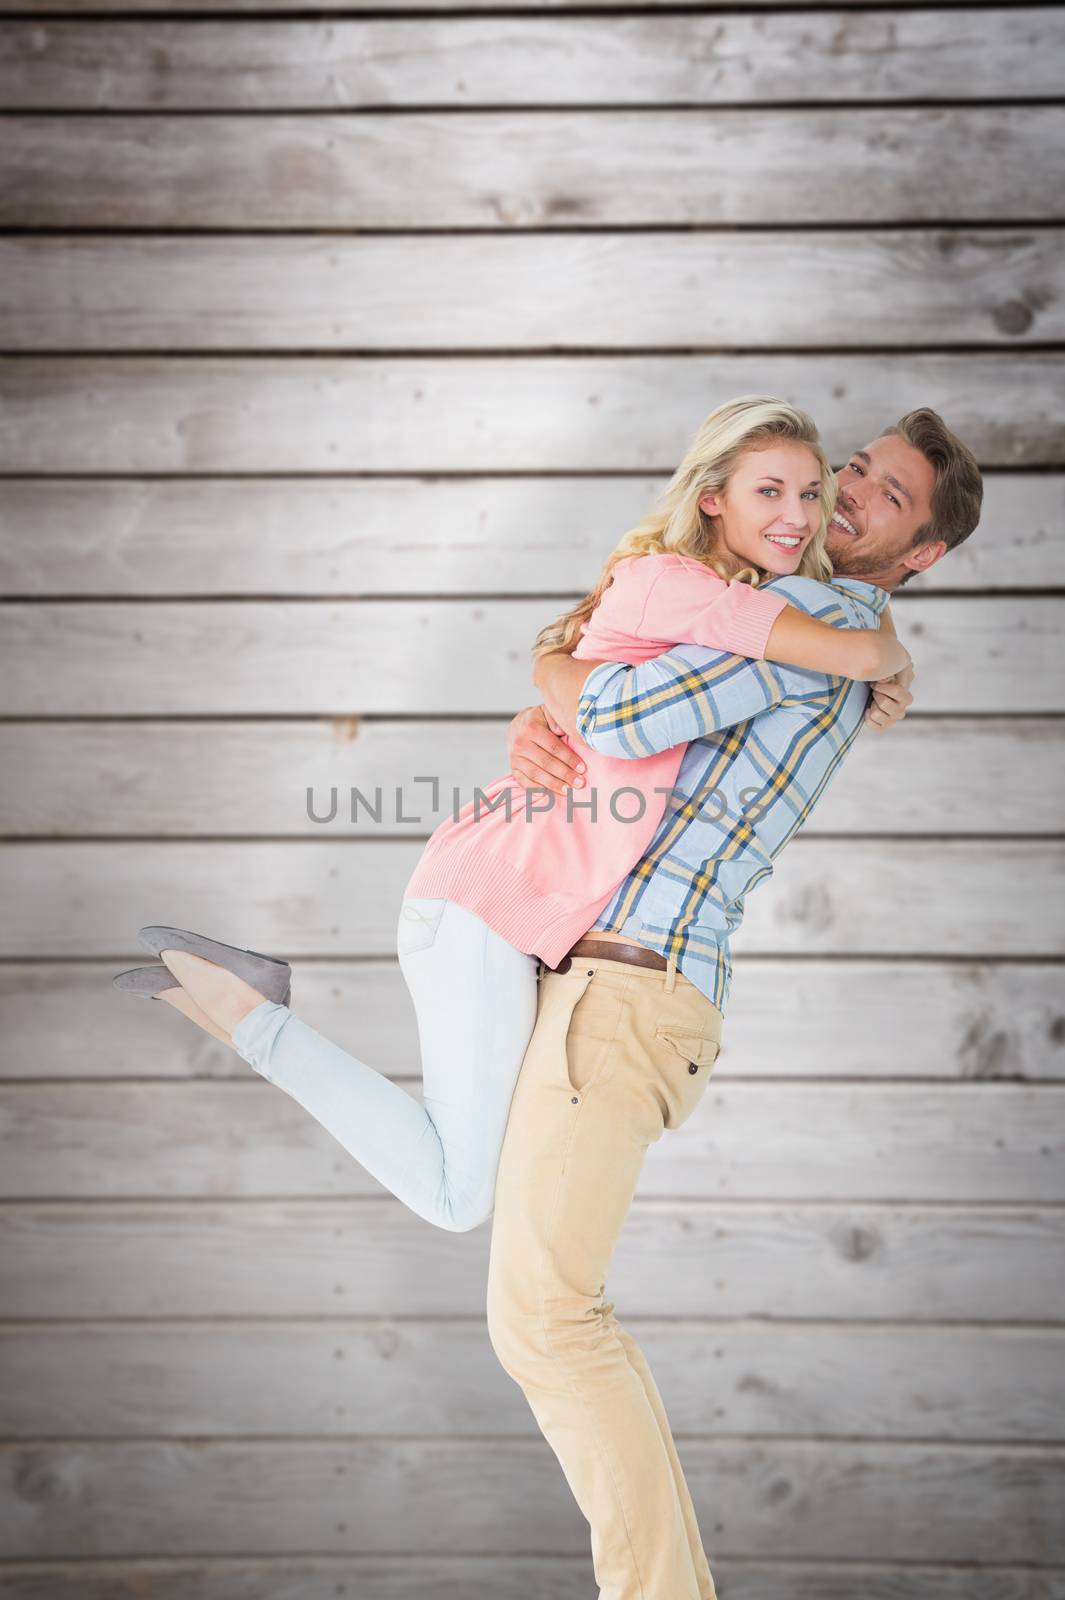 Handsome man picking up and hugging his girlfriend against wooden planks